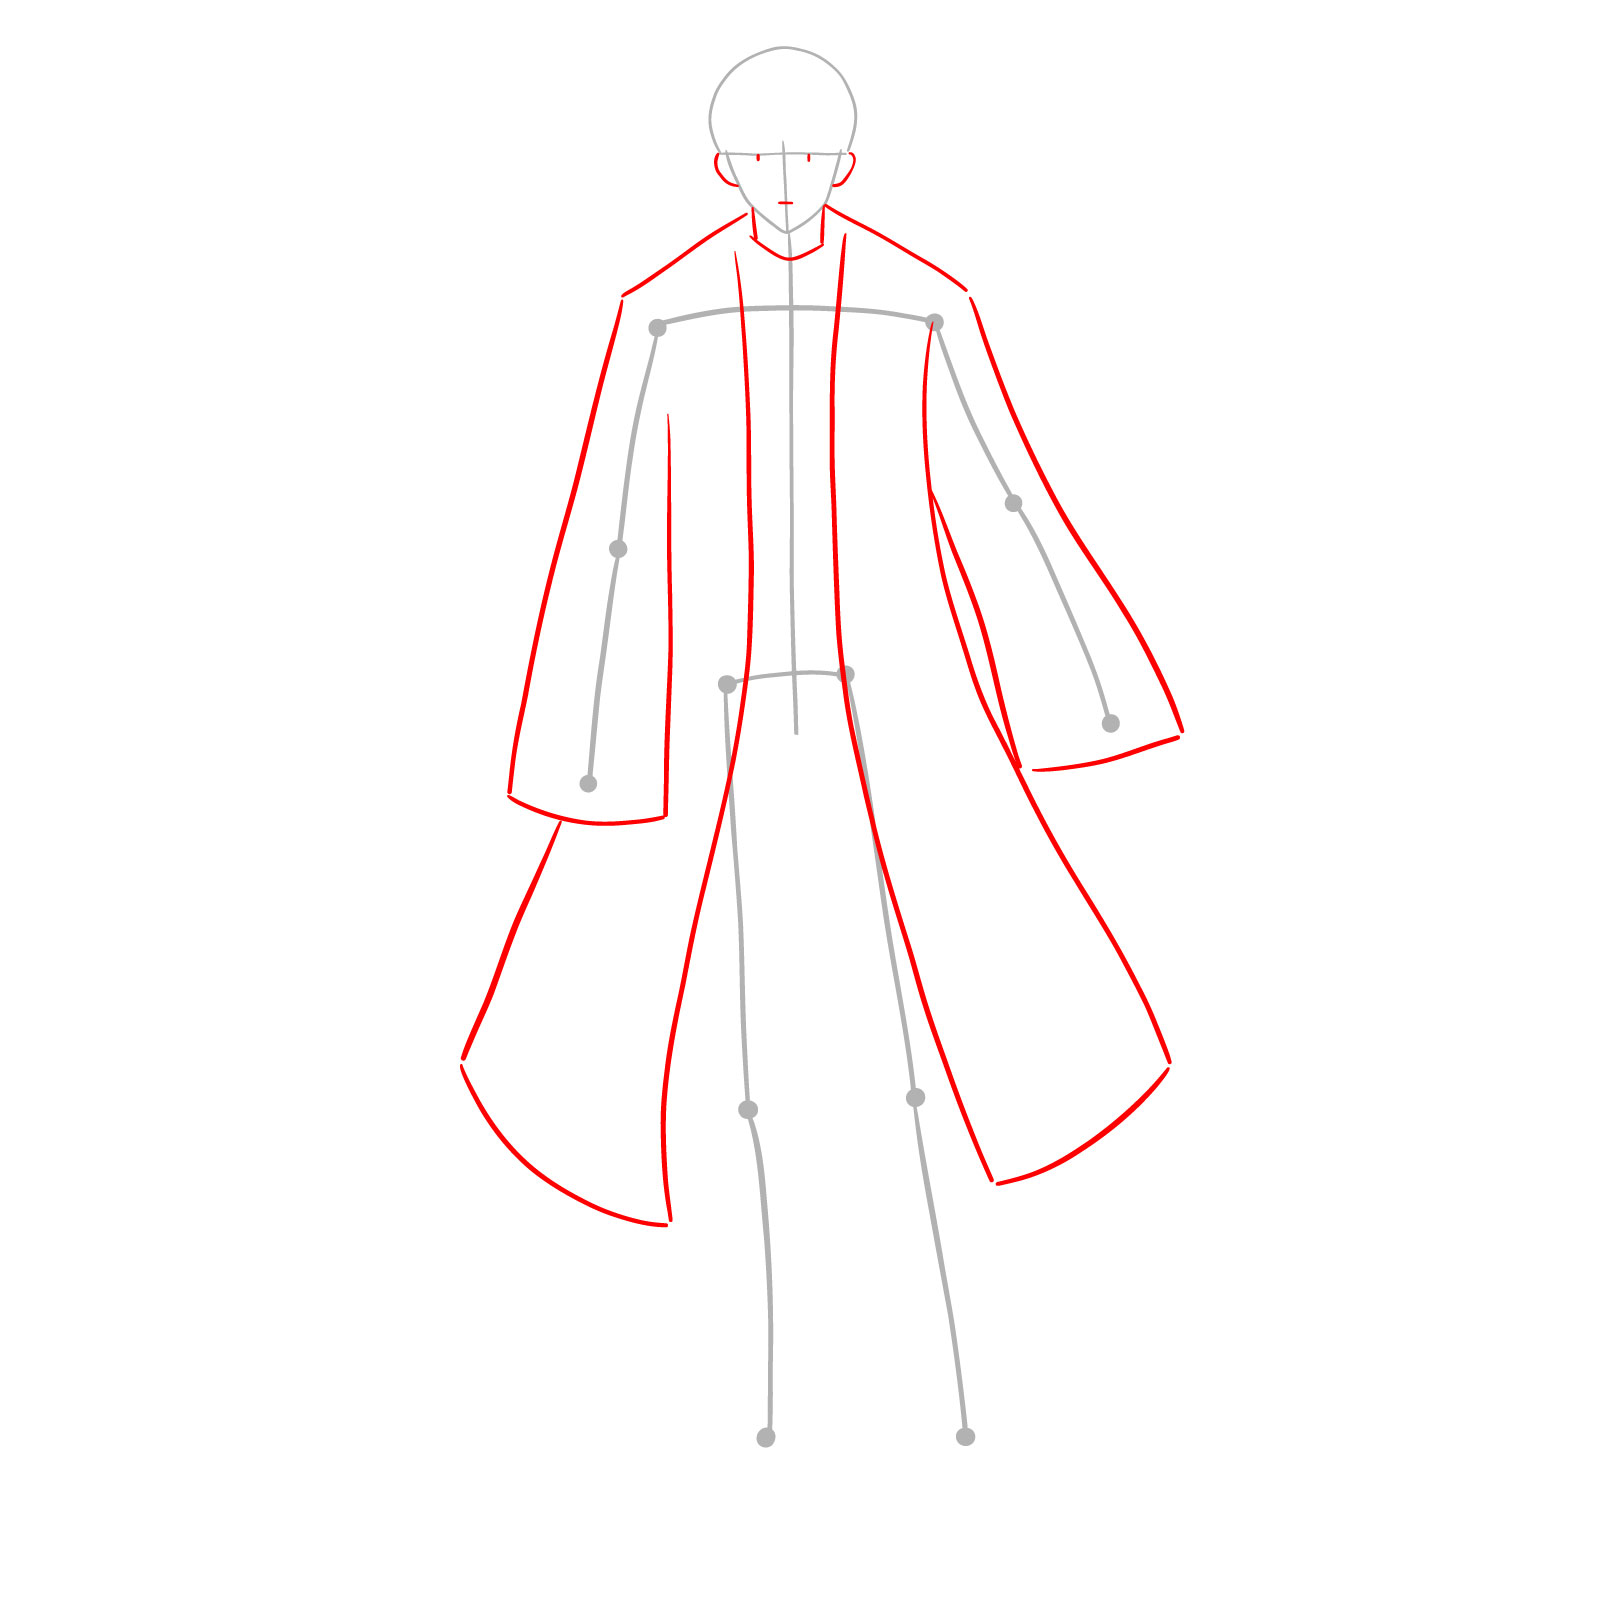 Mash full body drawing step 2 with facial features and cloak outline added - step 02